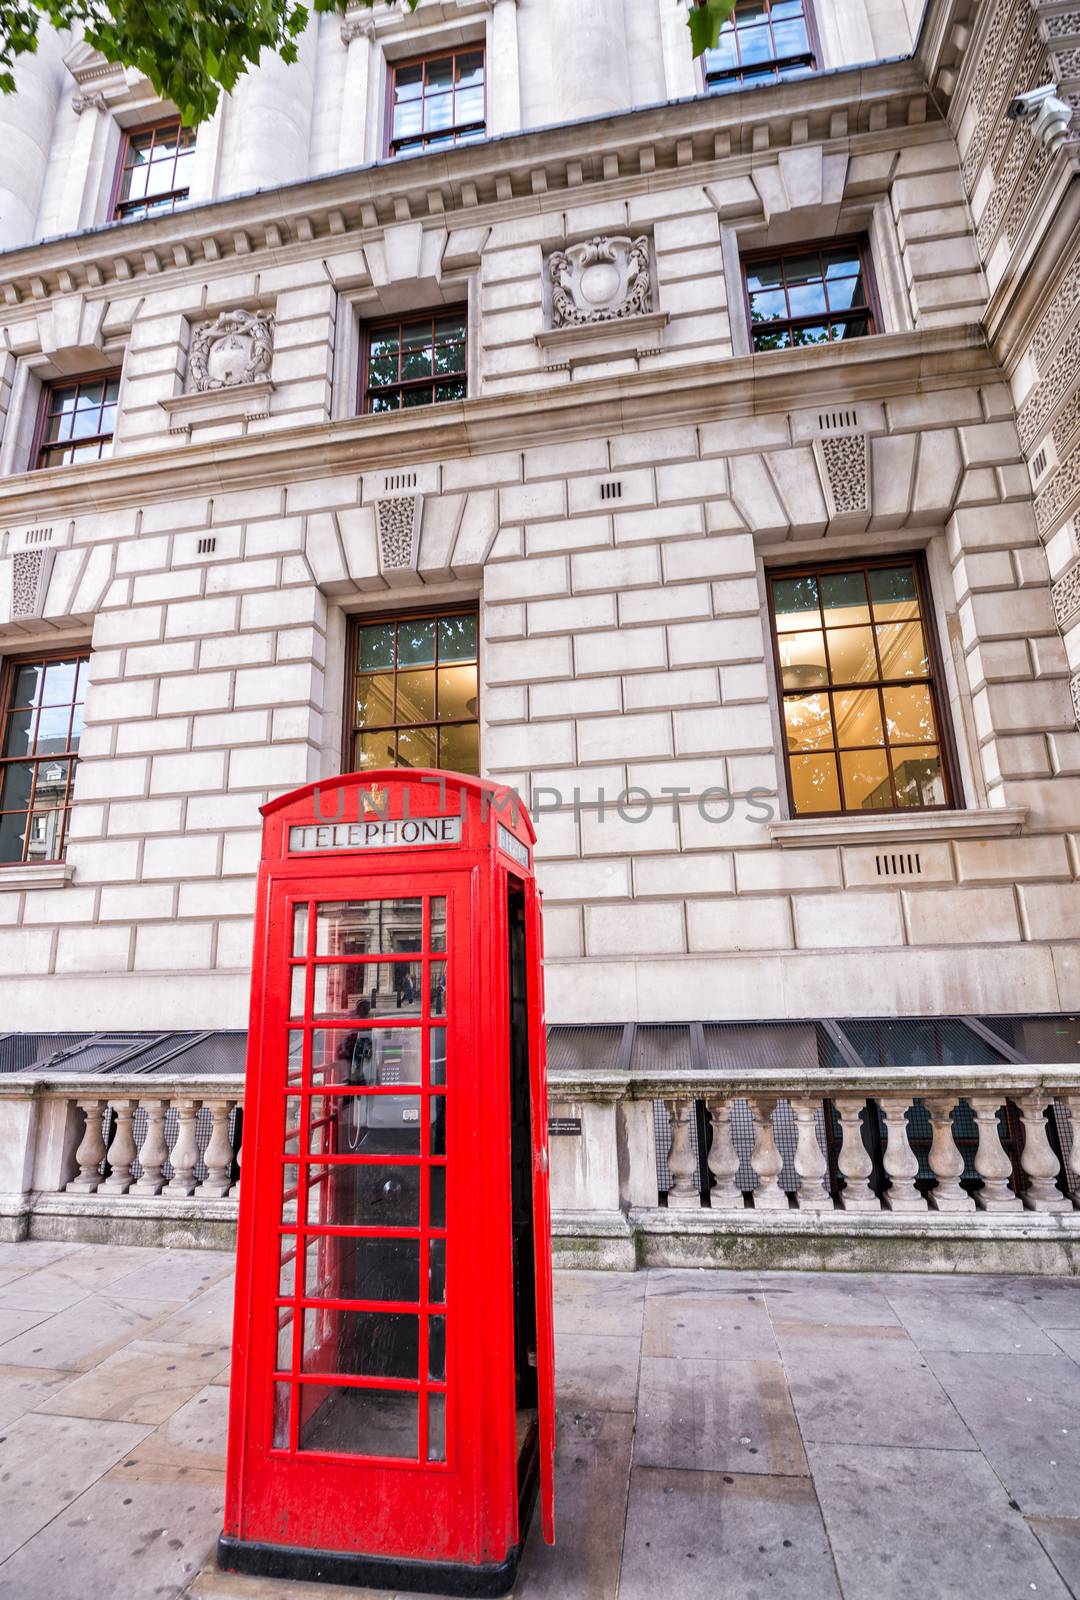 Red telephone booth, London.